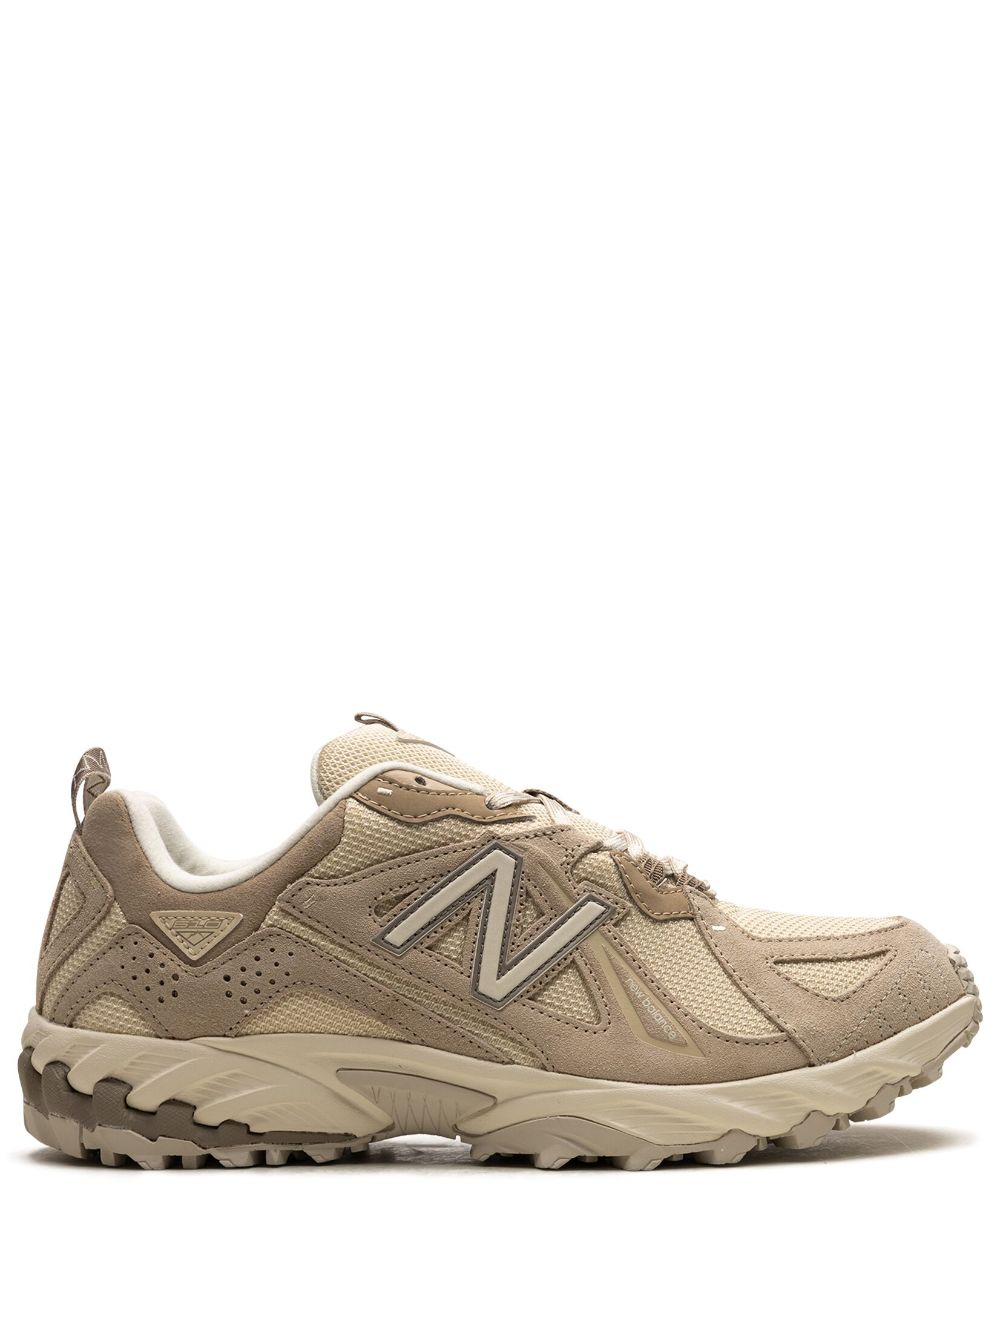 New Balance 610v1 low-top sneakers - Neutrals